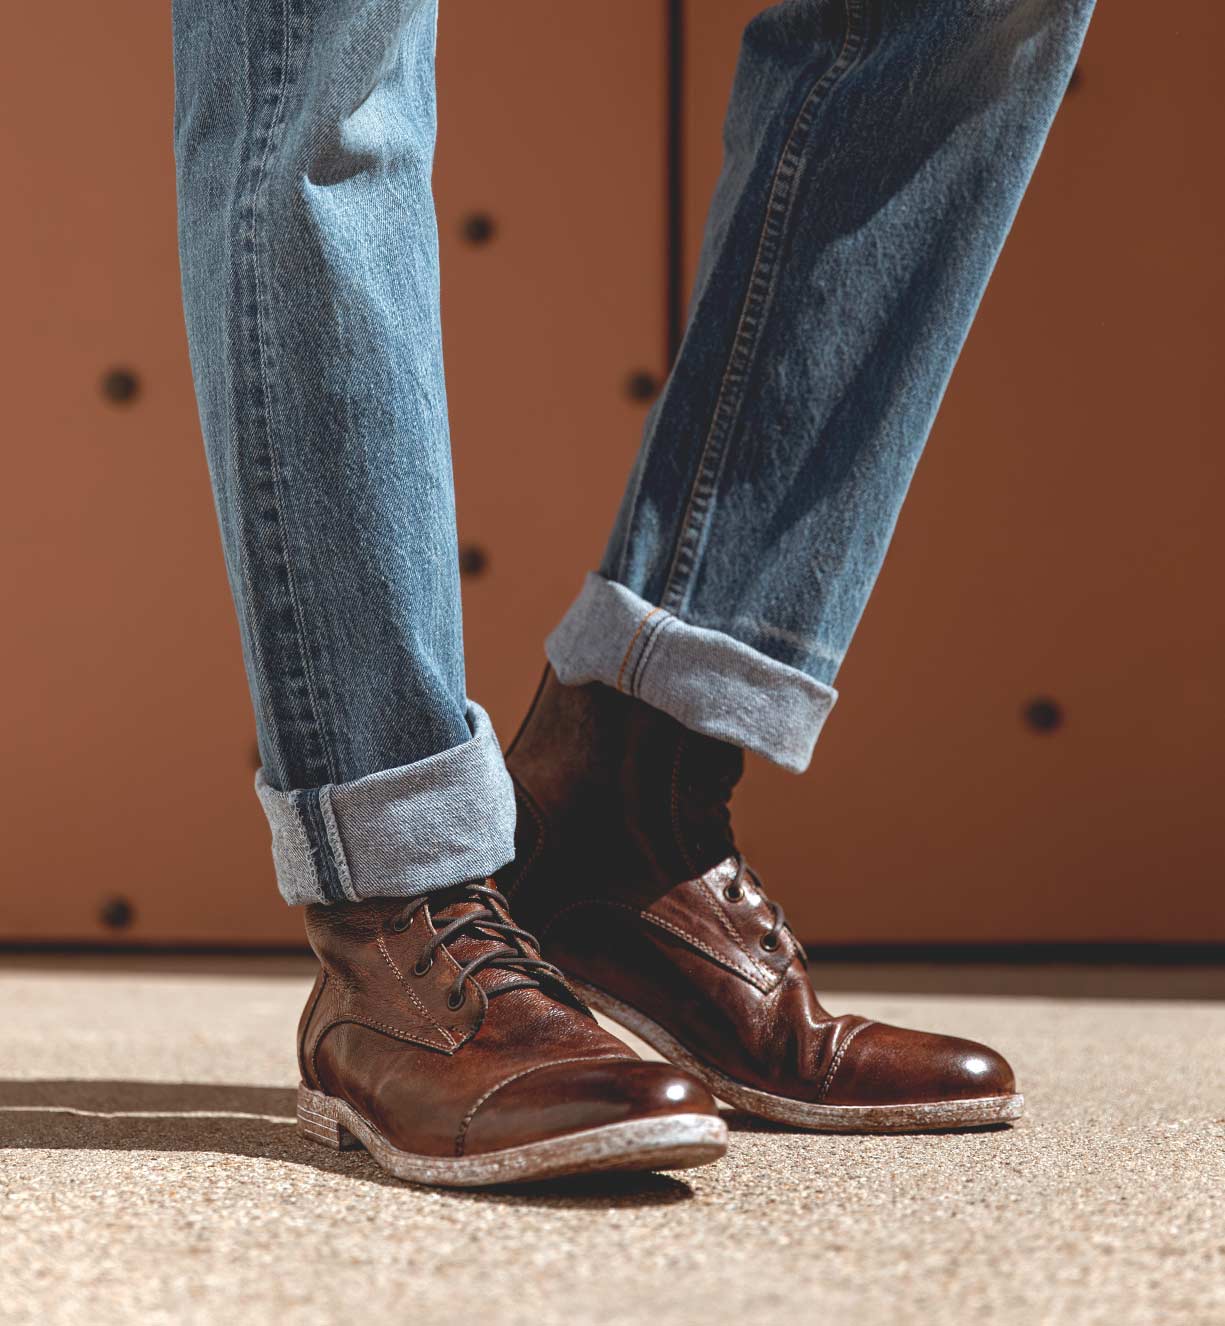 A man wearing jeans and a pair of Leonardo brown boots by Bed Stu.